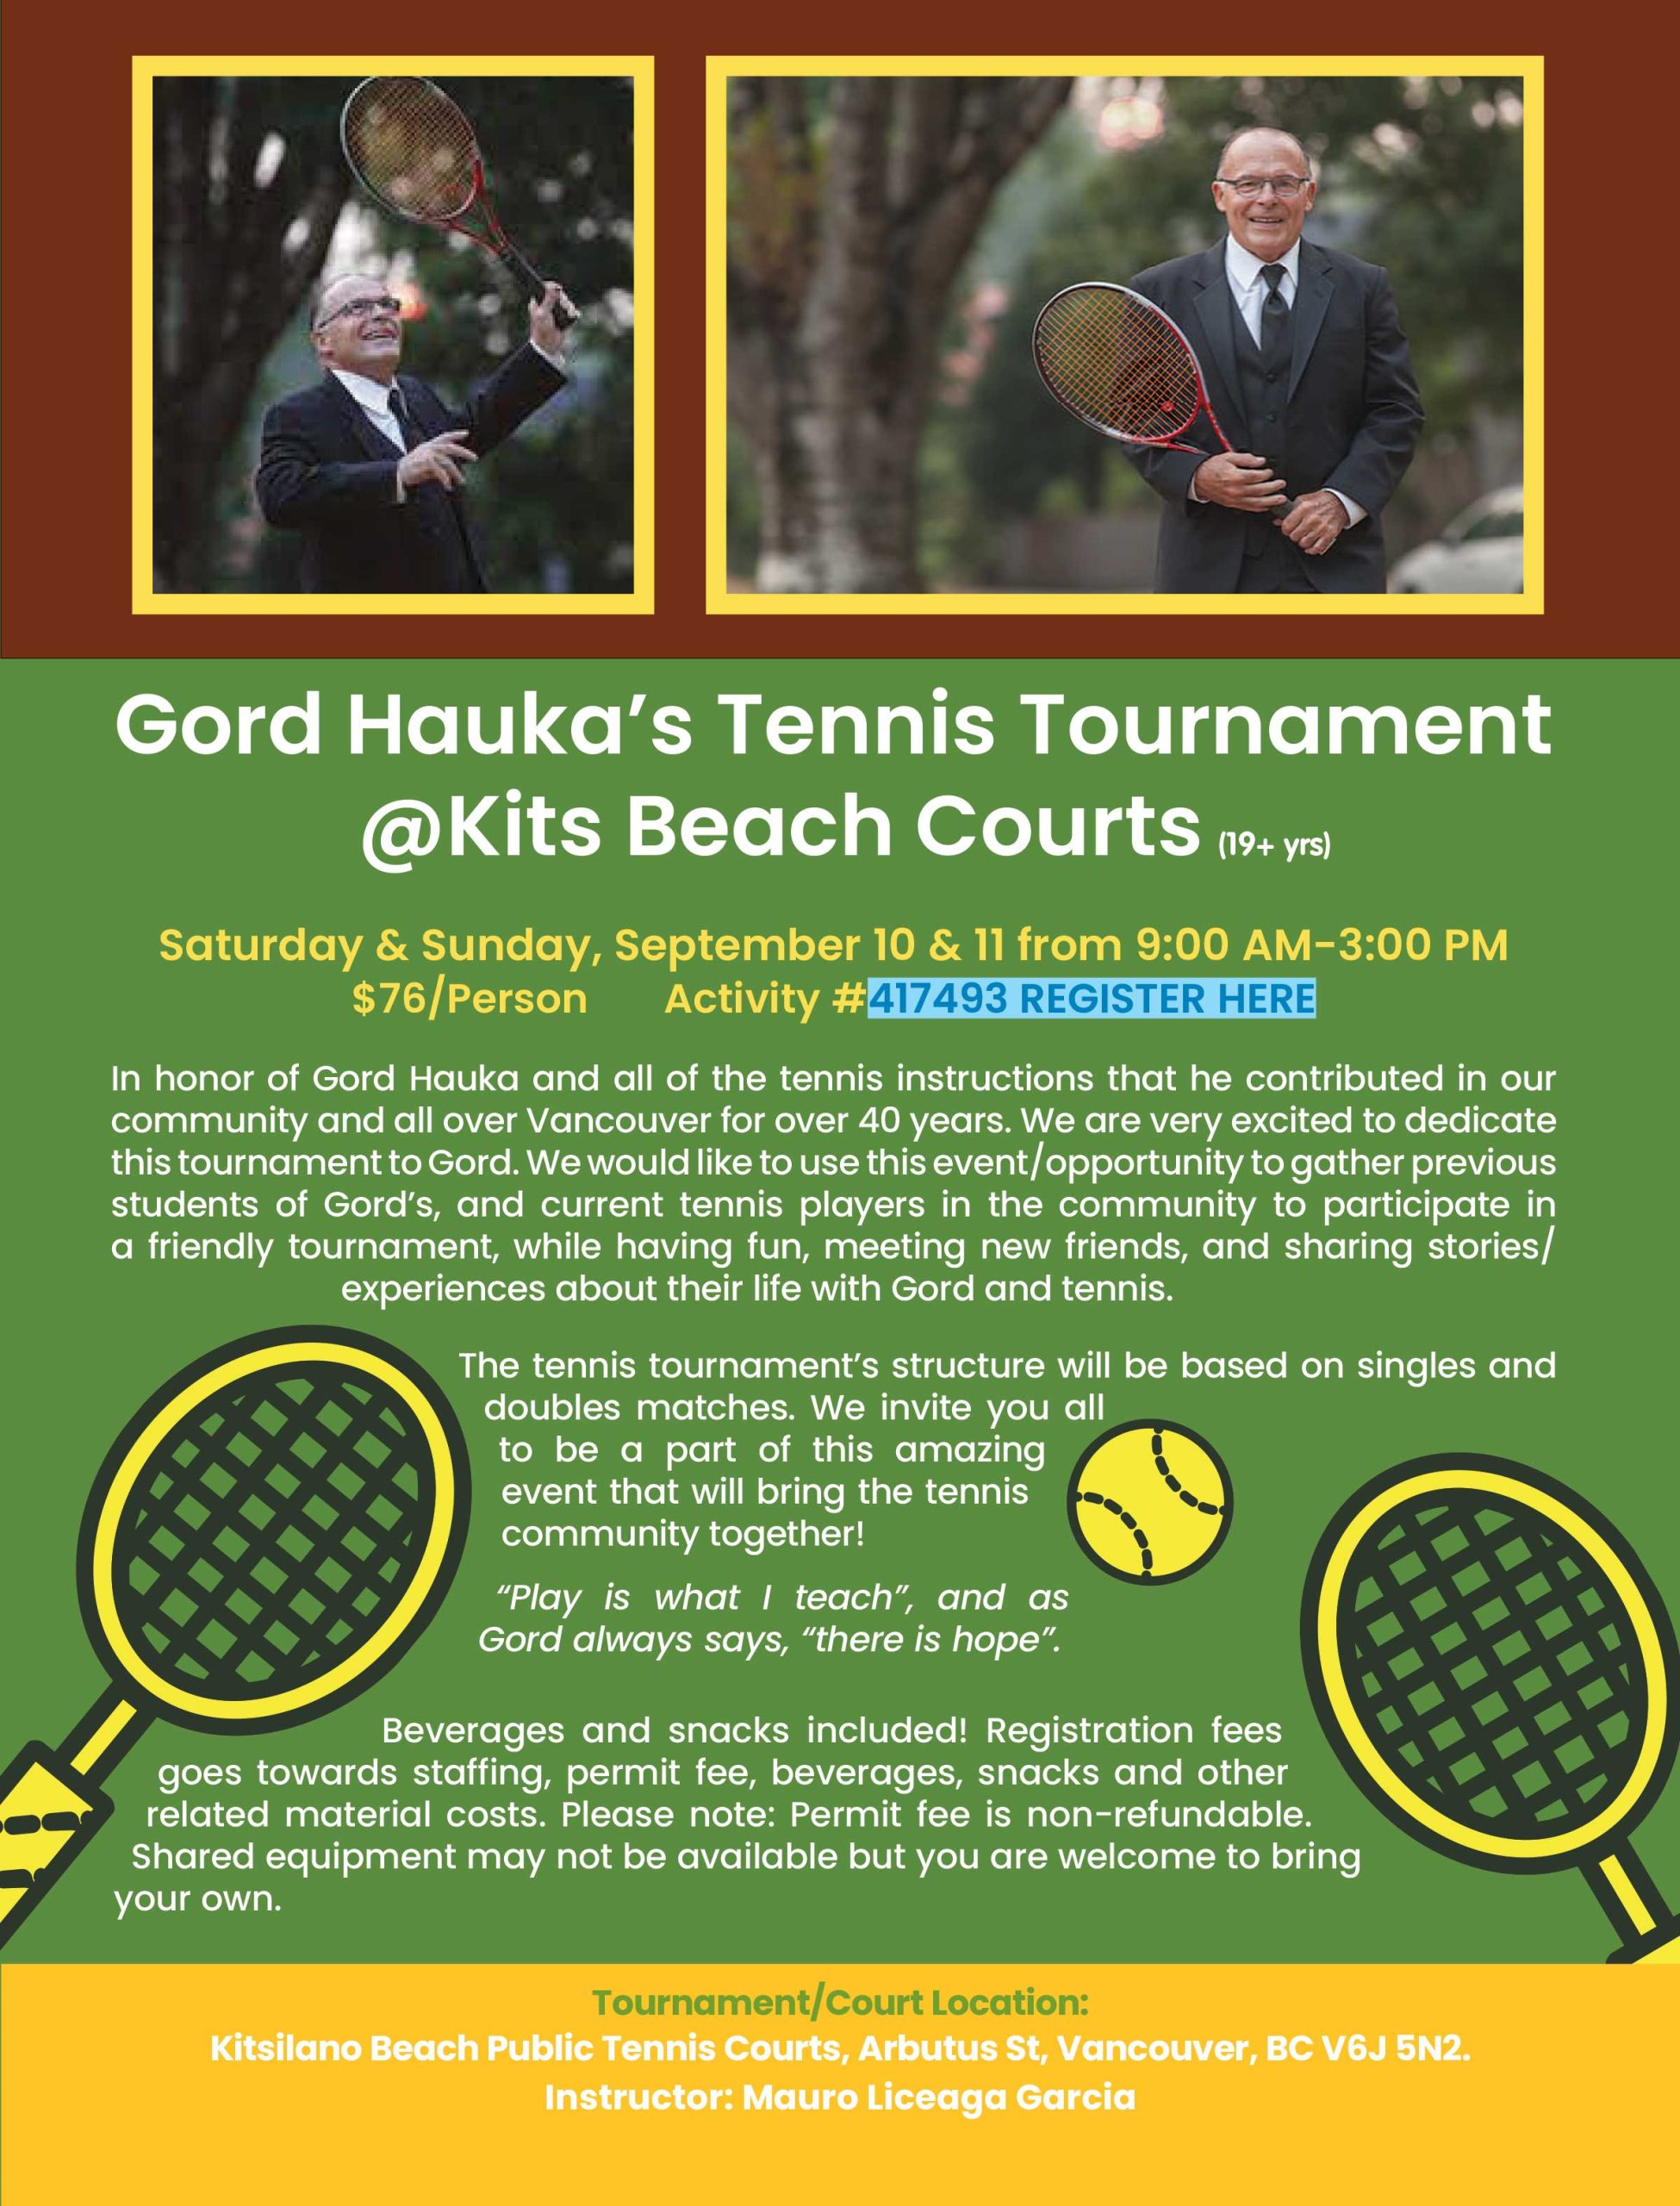  Gord Hauka’s Tennis Tournament @Kits Beach Courts (19+ yrs) Saturday & Sunday, September 10 & 11 from 9:00 AM-3:00 PM $76/Person Activity #417493 REGISTER HERE In honor of Gord Hauka and all of the tennis instructions that he contributed in our community and all over Vancouver for over 40 years. We are very excited to dedicate this tournament to Gord. We would like to use this event/opportunity to gather previous students of Gord’s, and current tennis players in the community to participate in a friendly tournament, while having fun, meeting new friends, and sharing stories/experiences about their life with Gord and tennis. The tennis tournament’s structure will be based on singles and doubles matches. We invite you all to be a part of this amazing event that will bring the tennis community together! “Play is what I teach”, and as Gord always says, “there is hope”. Beverages and snacks included! Registration fees goes towards staffing, permit fee, beverages, snacks and other related material costs. Please note: Permit fee is non-refundable. Shared equipment may not be available but you are welcome to bring your own. Tournament/Court Location: Kitsilano Beach Public Tennis Courts, Arbutus St, Vancouver, BC V6J 5N2. Instructor: Mauro Liceaga Garcia 